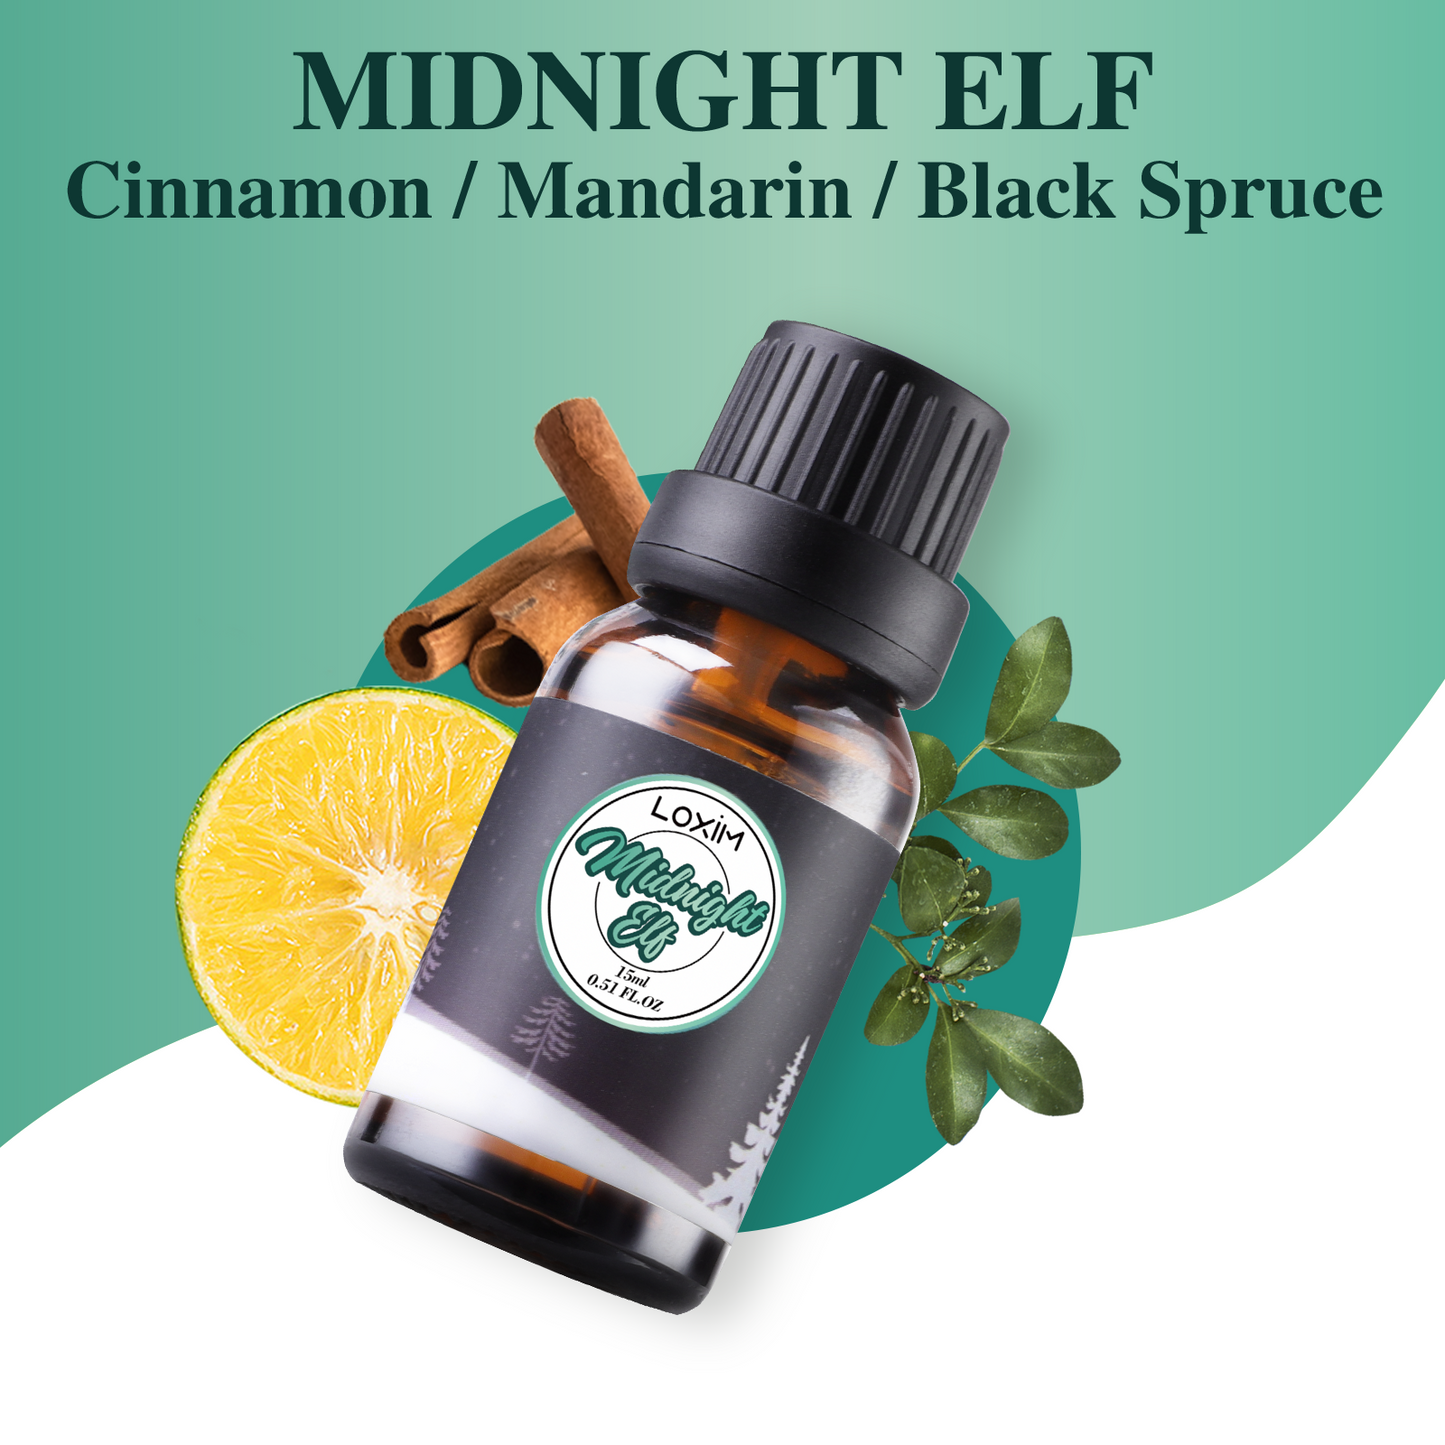 LOXIM Midnight Elf Essential Oil Blend (Cinnamon & Mandarin & Spruce) Pure and Natural for Aromatherapy Diffuser, Skin & Hair Care, Stress Relief, Relaxation, Sleep 15ml,0.51 FL.OZ